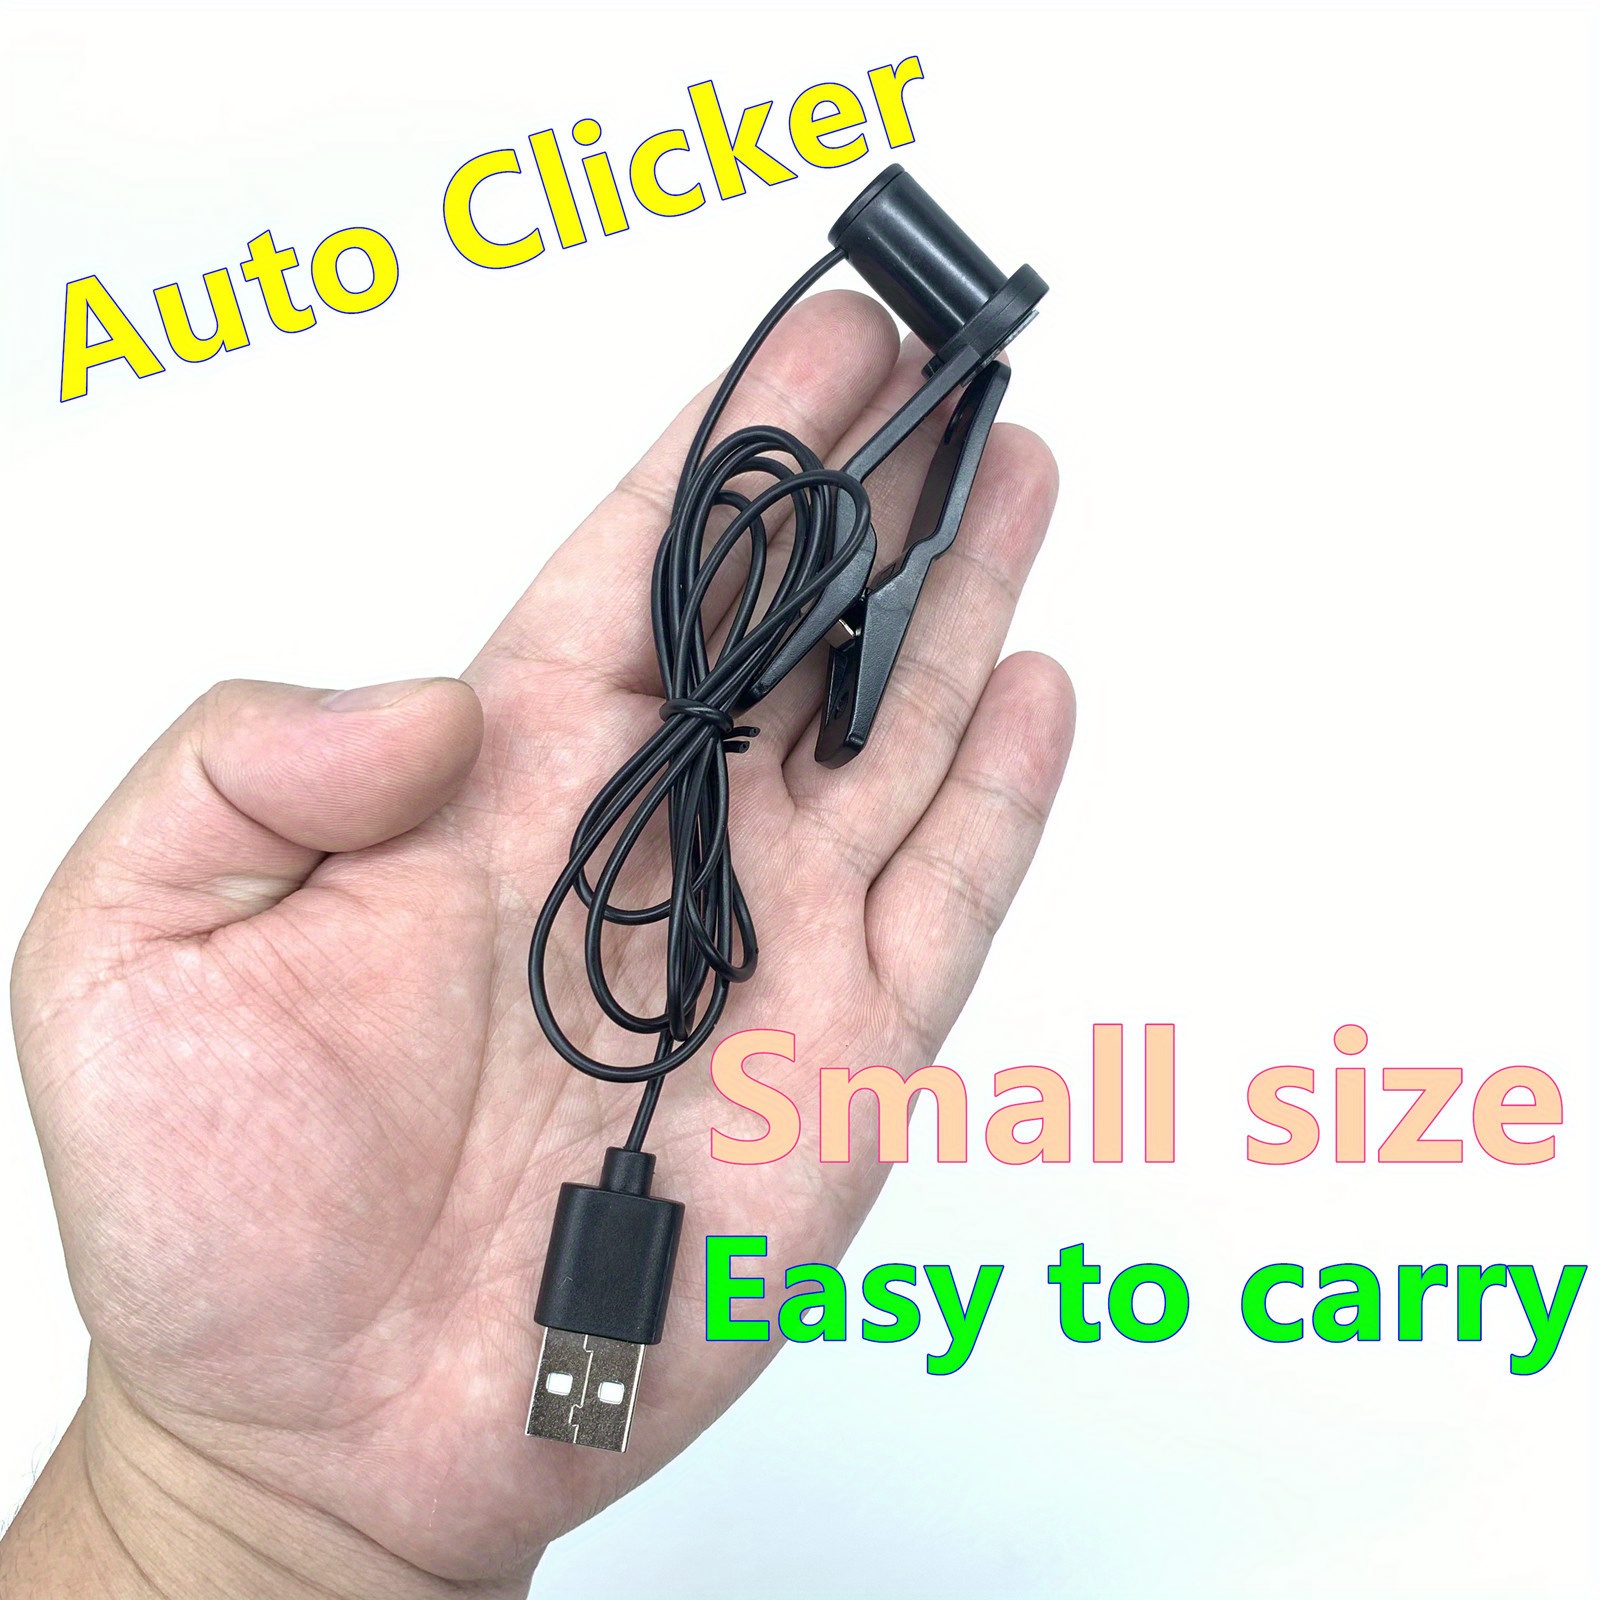  Screen Auto Clicker for iPhone iPad: Physically